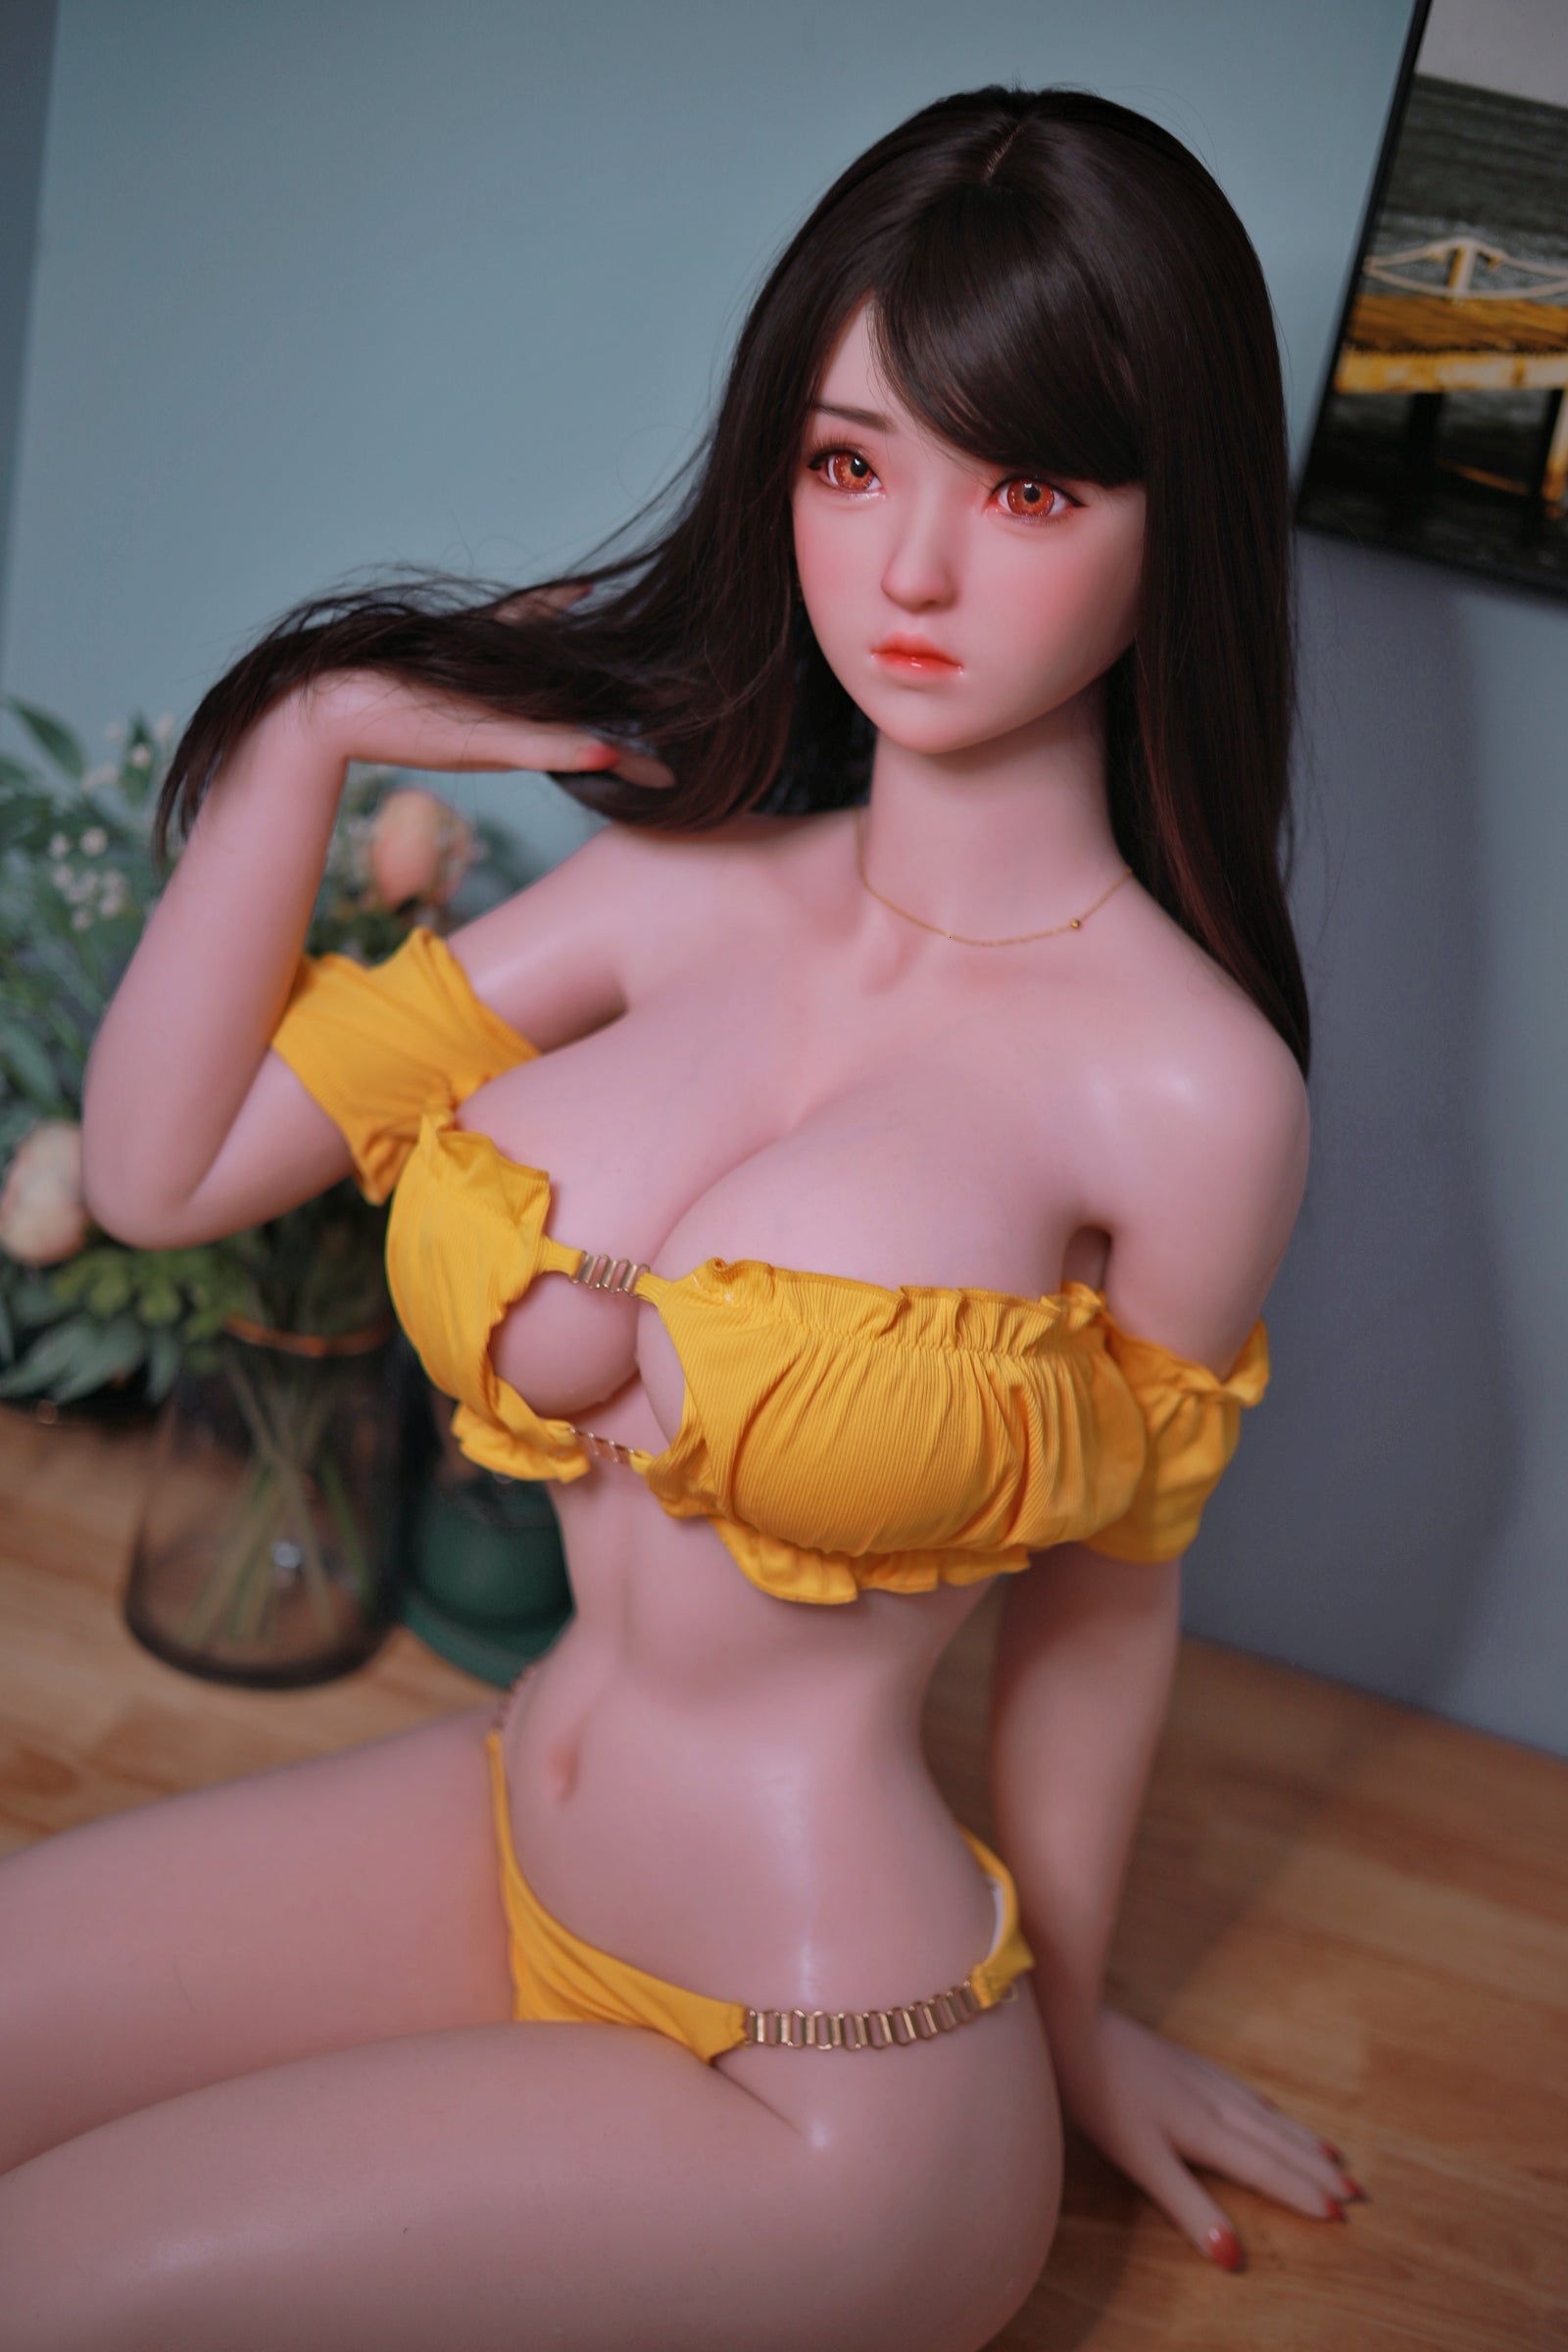 JY Doll 161 cm Silicone - Lian meng | Buy Sex Dolls at DOLLS ACTUALLY